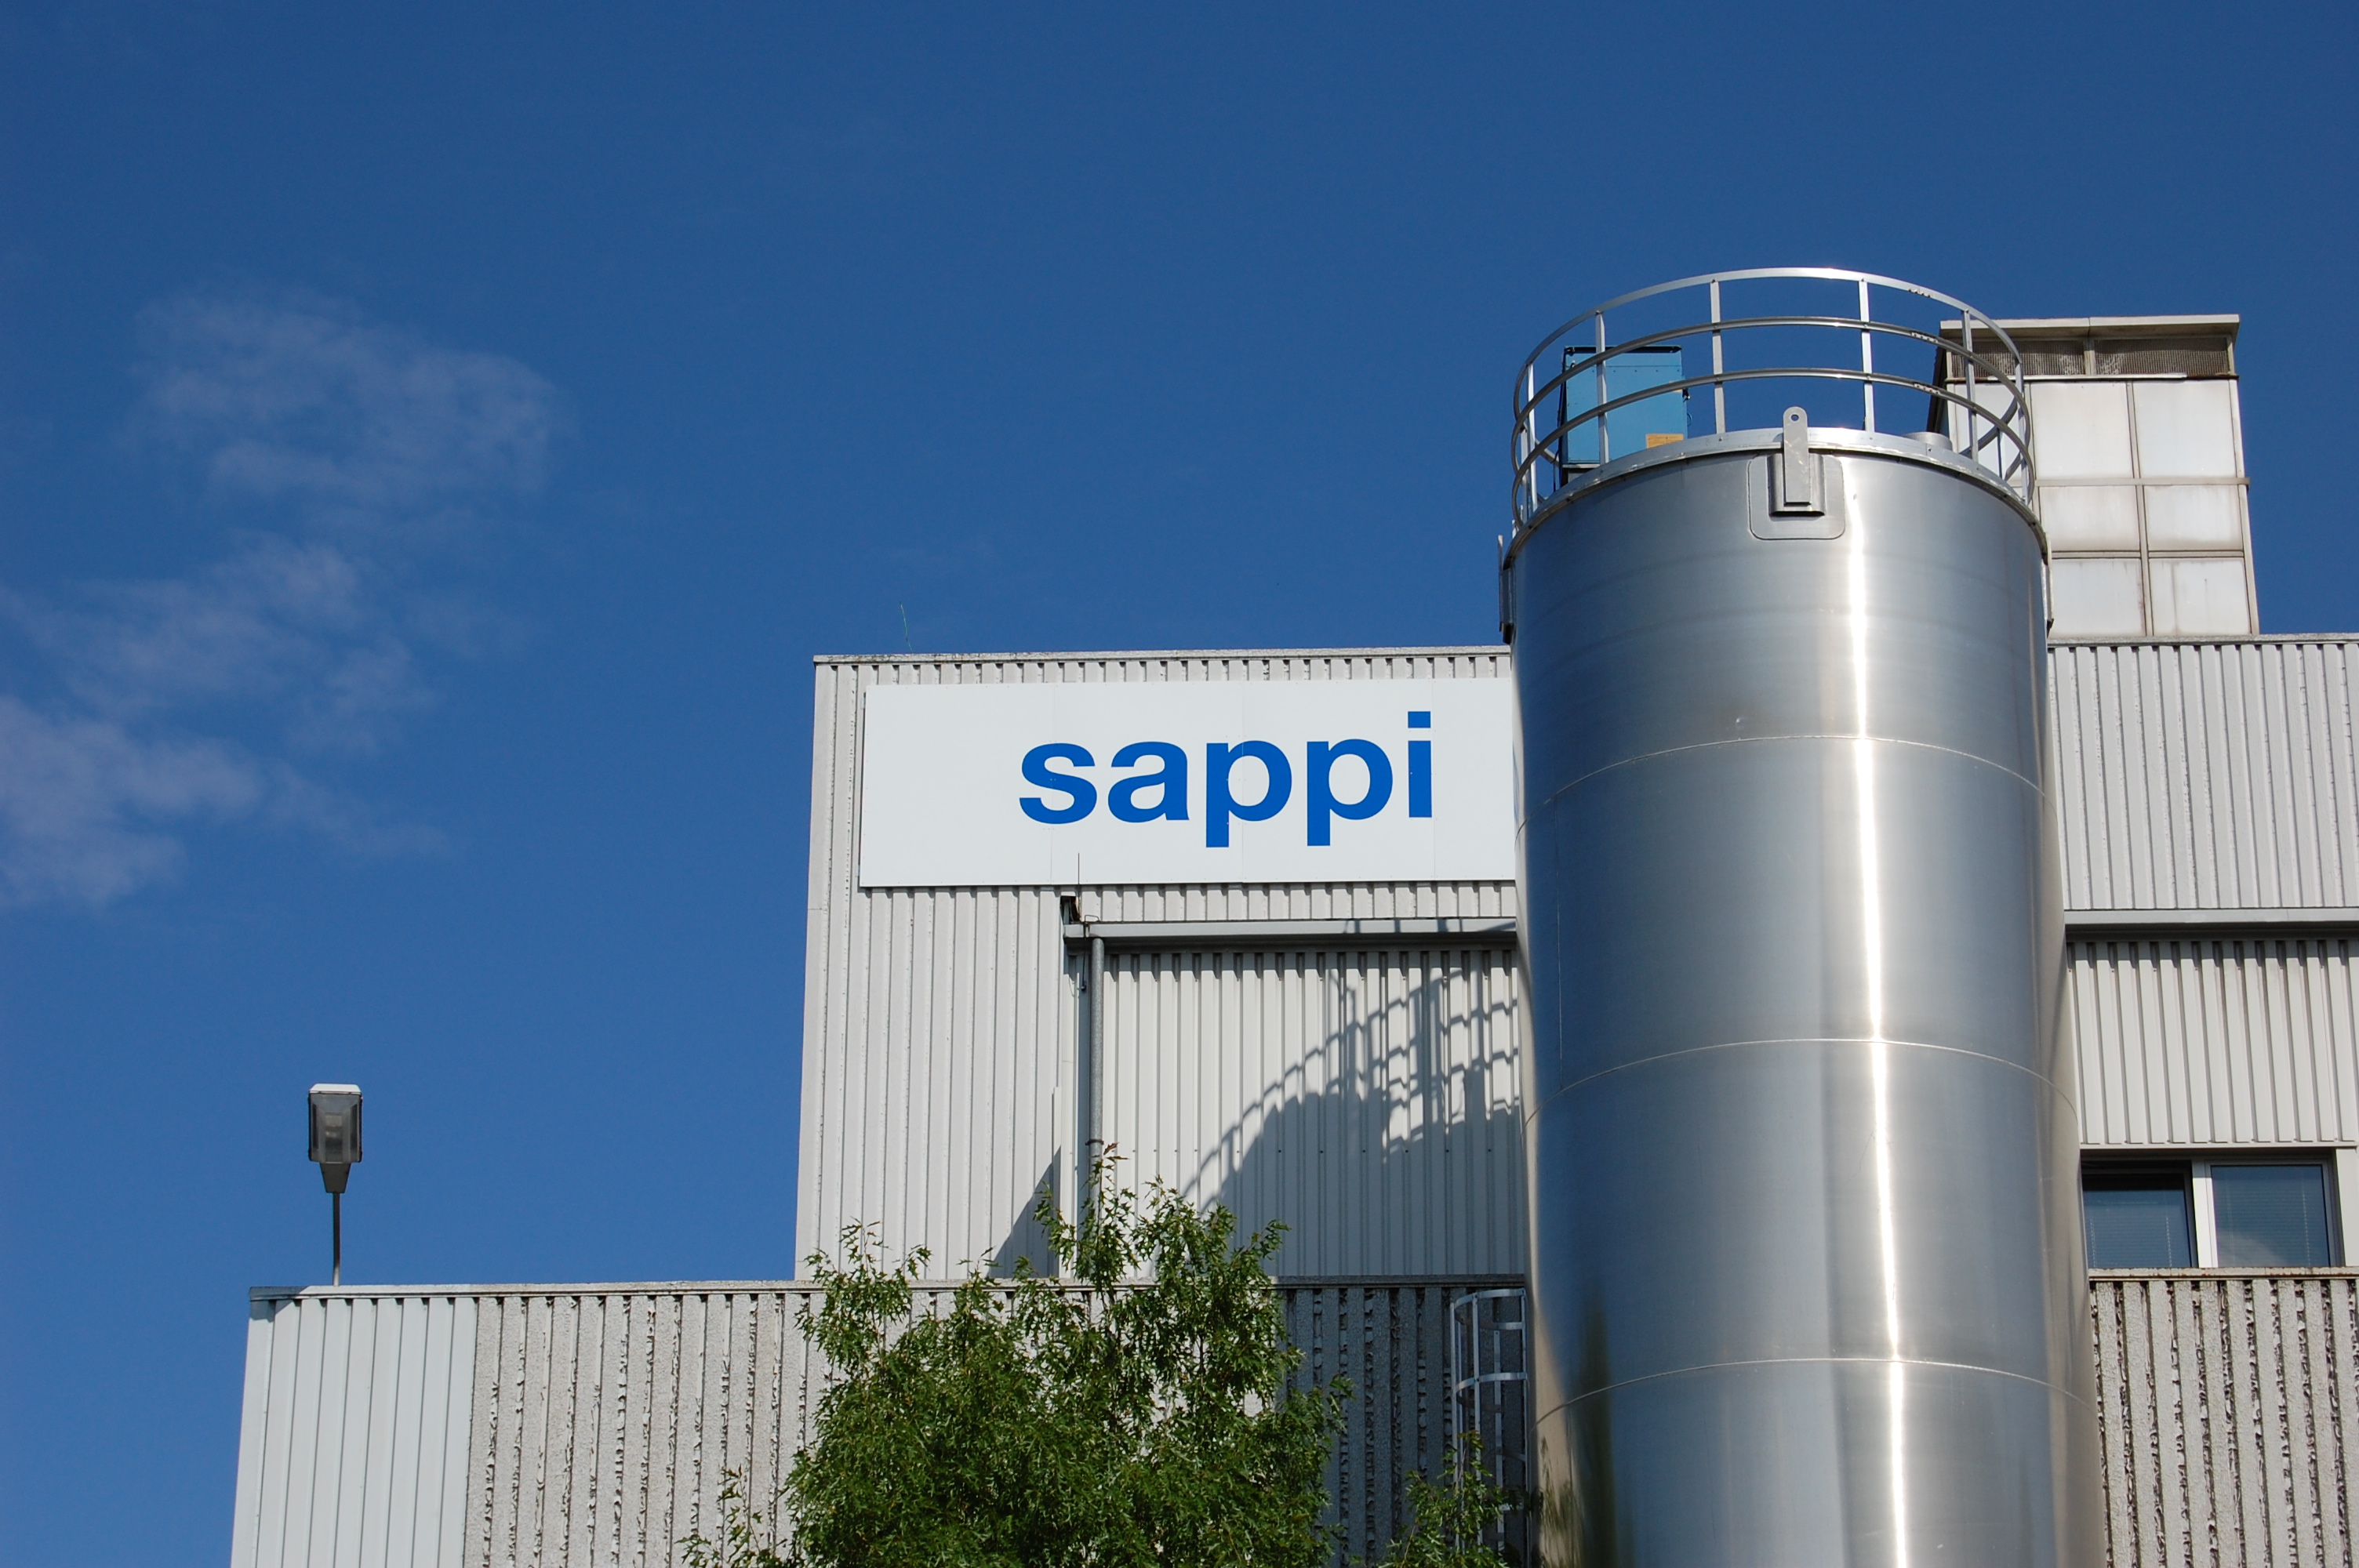 South Africa’s Sappi to Invest $305M in North America, Europe